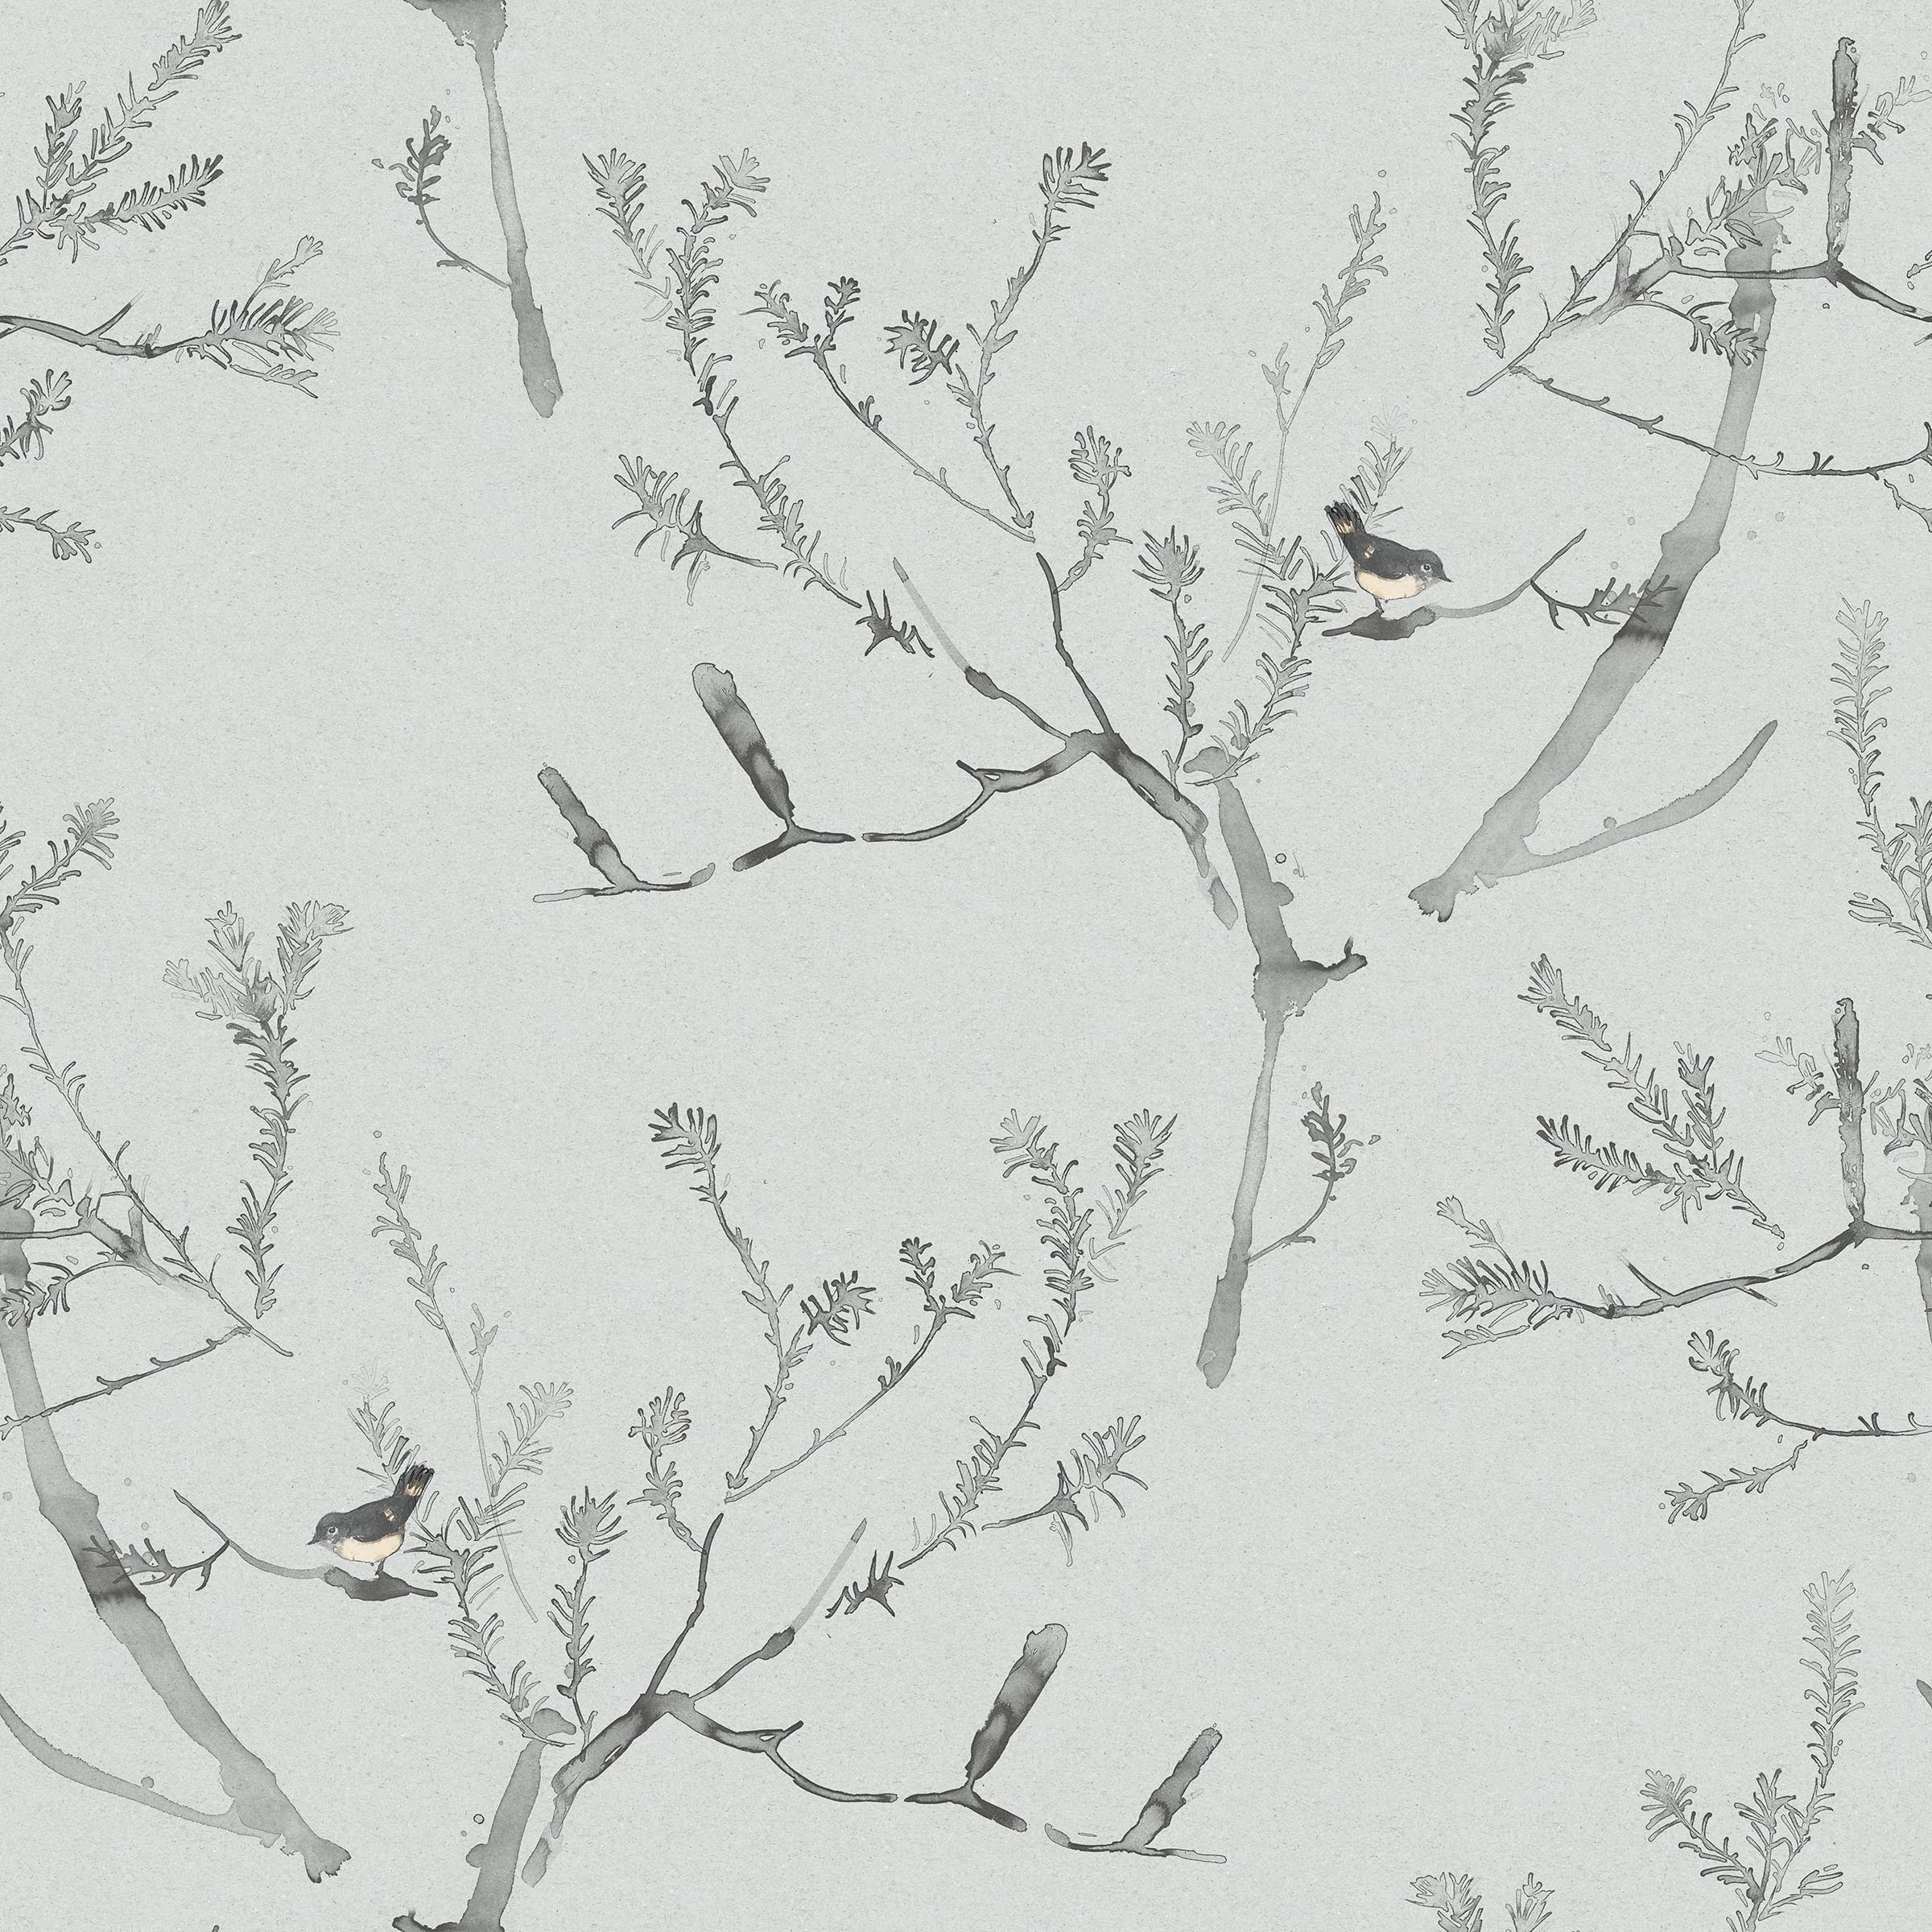 Detail of wallpaper in a painterly bird and branch pattern in shades of gray on a light gray field.